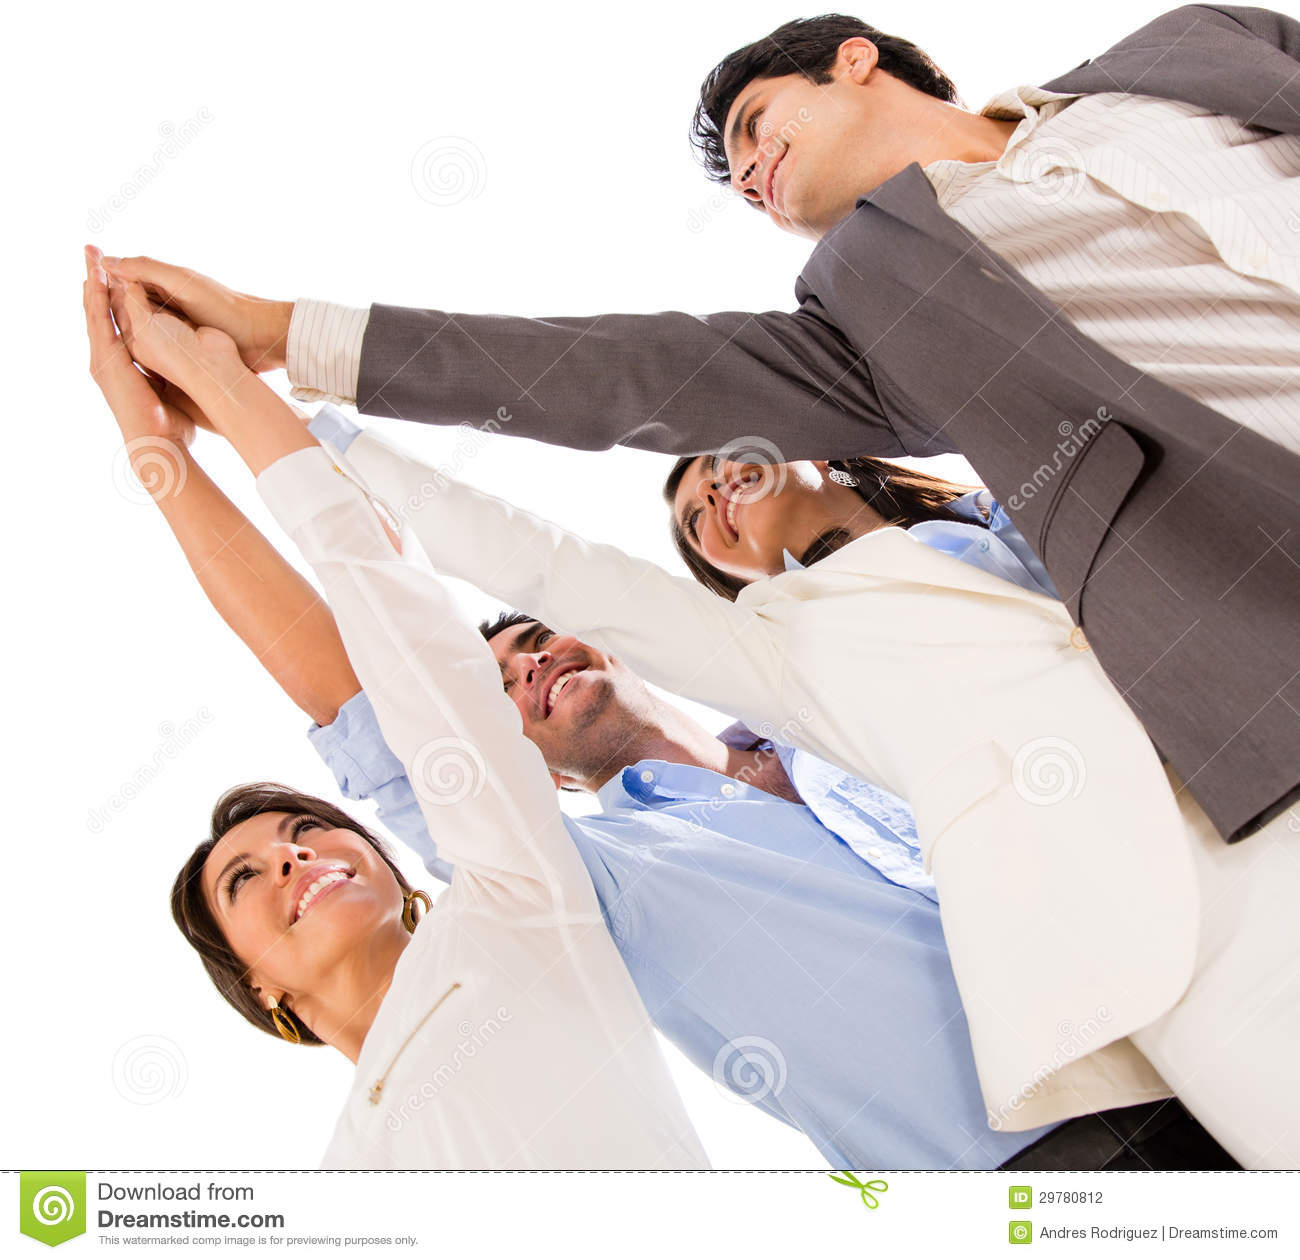 Group Of Business People Celebrating Their Teamwork With A High Five